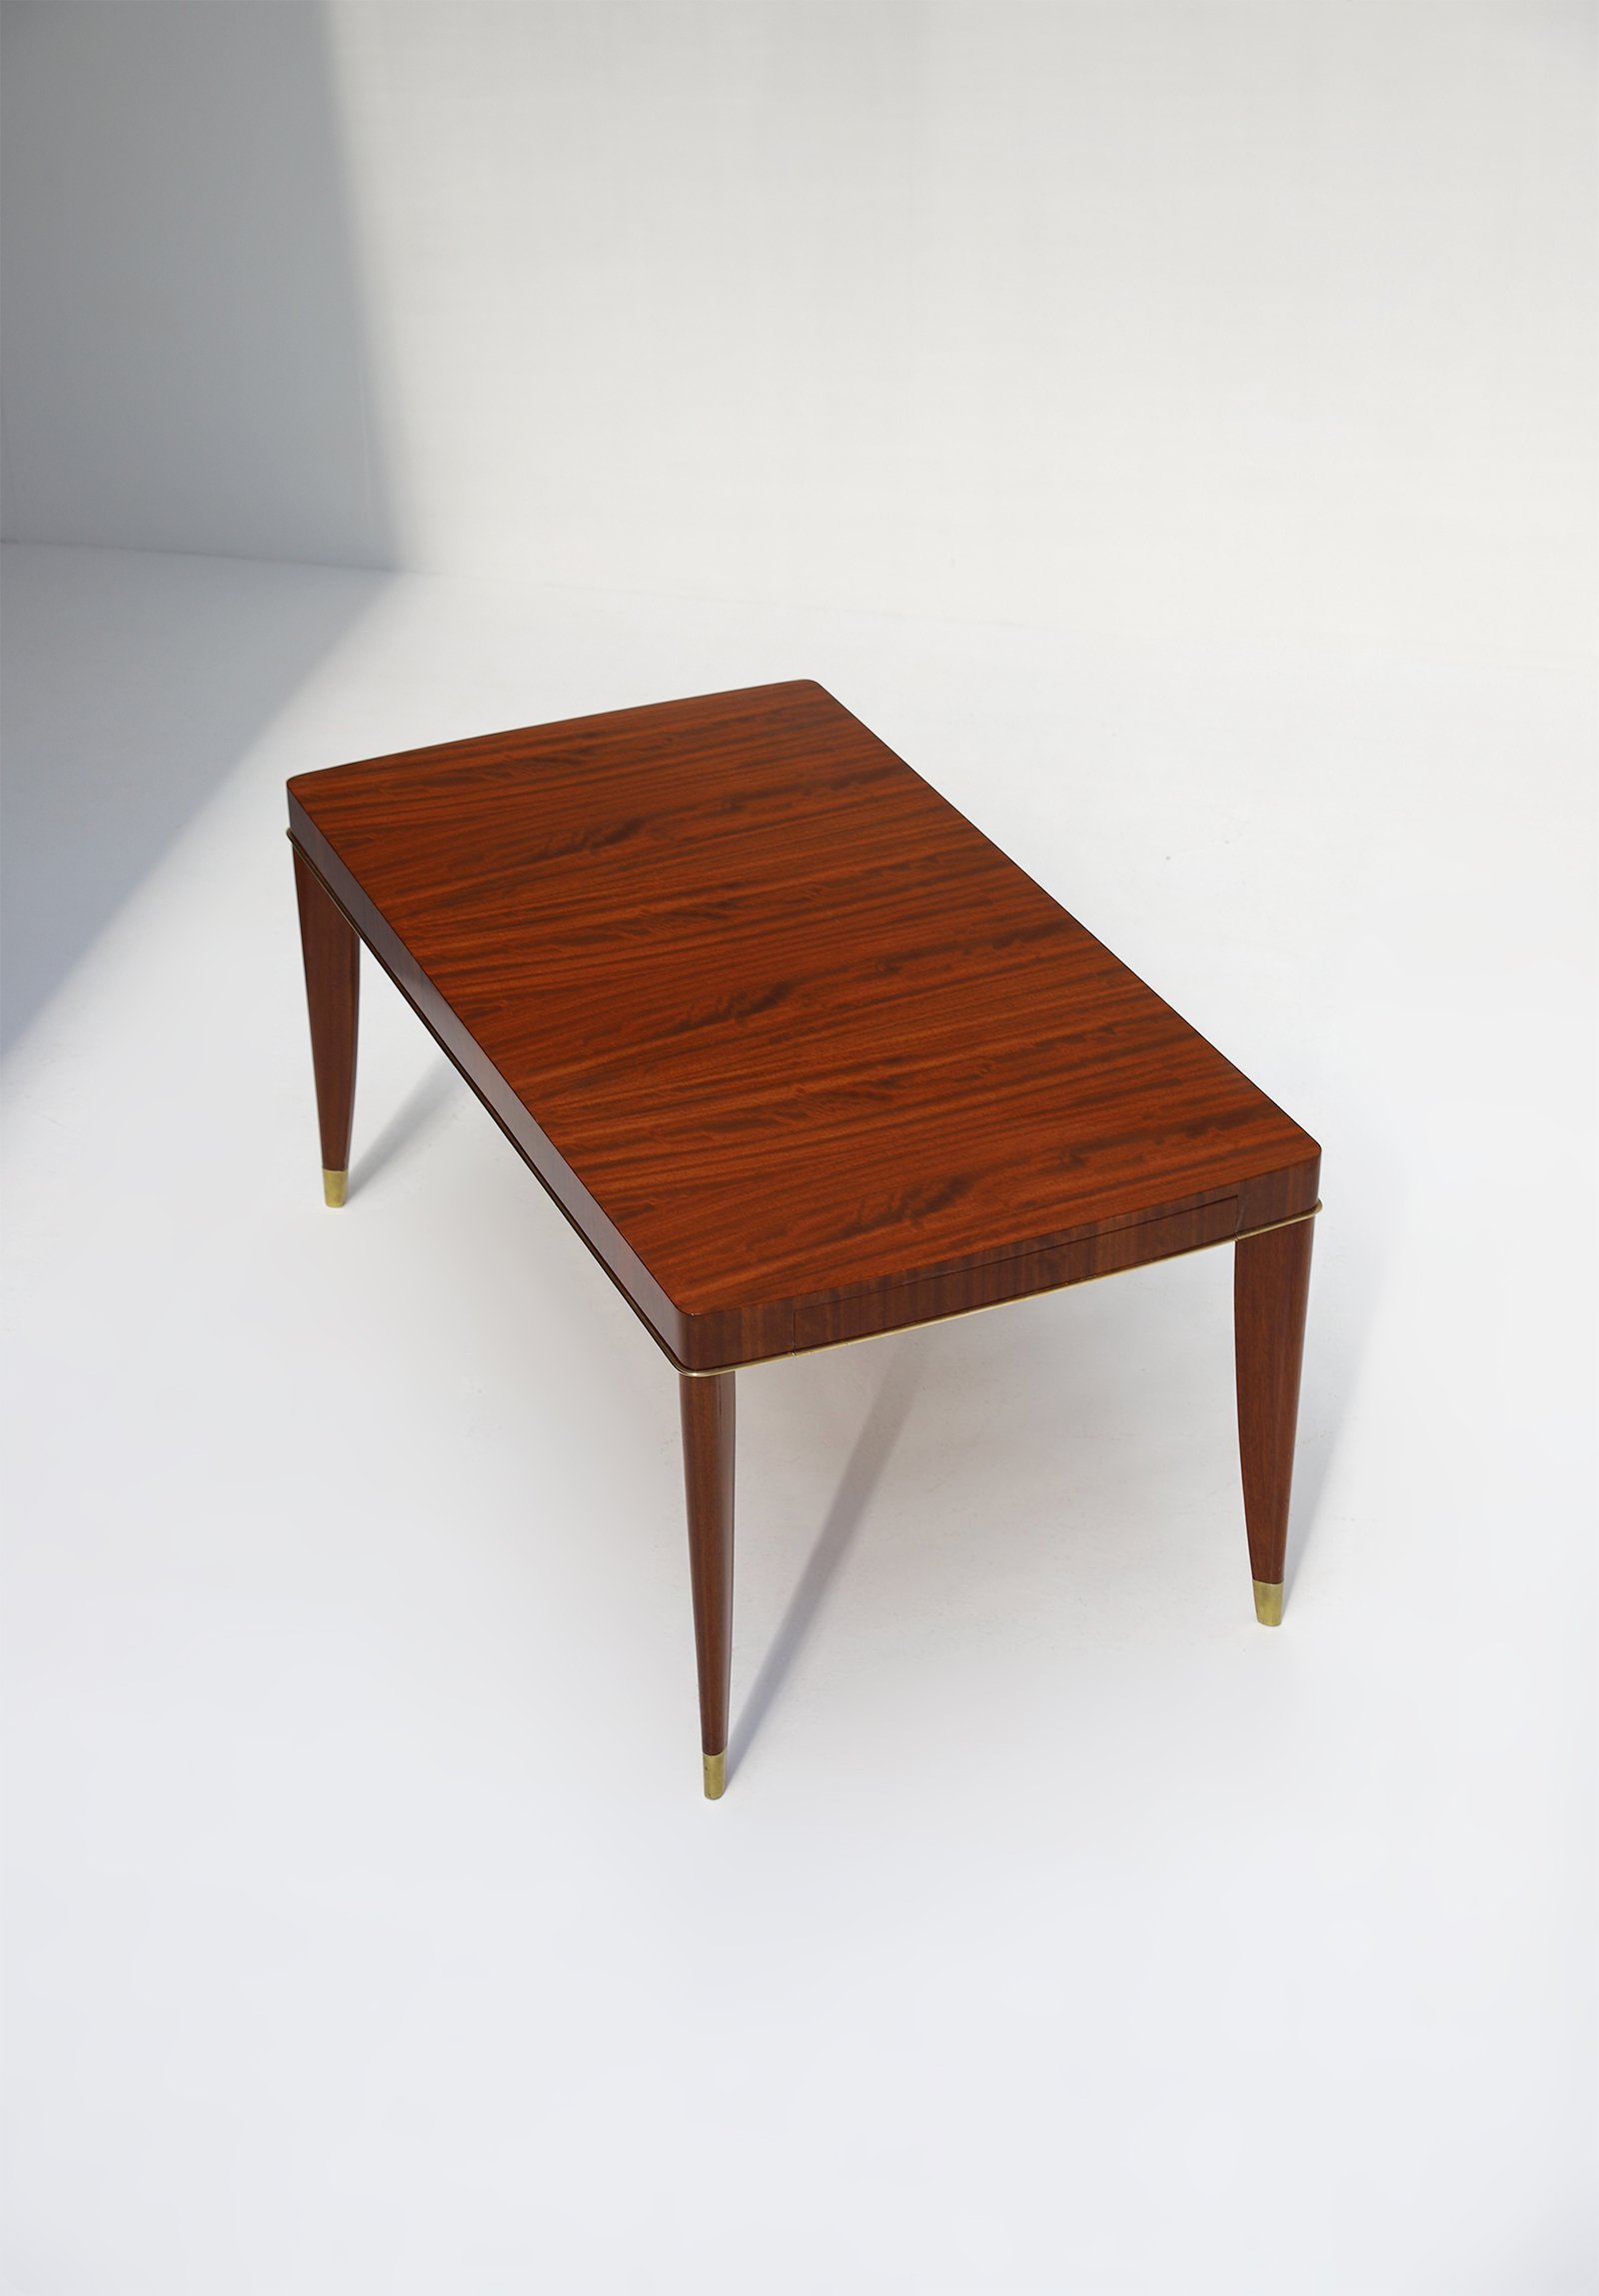 De Coene Dining Voltaire Table 1930simage 1